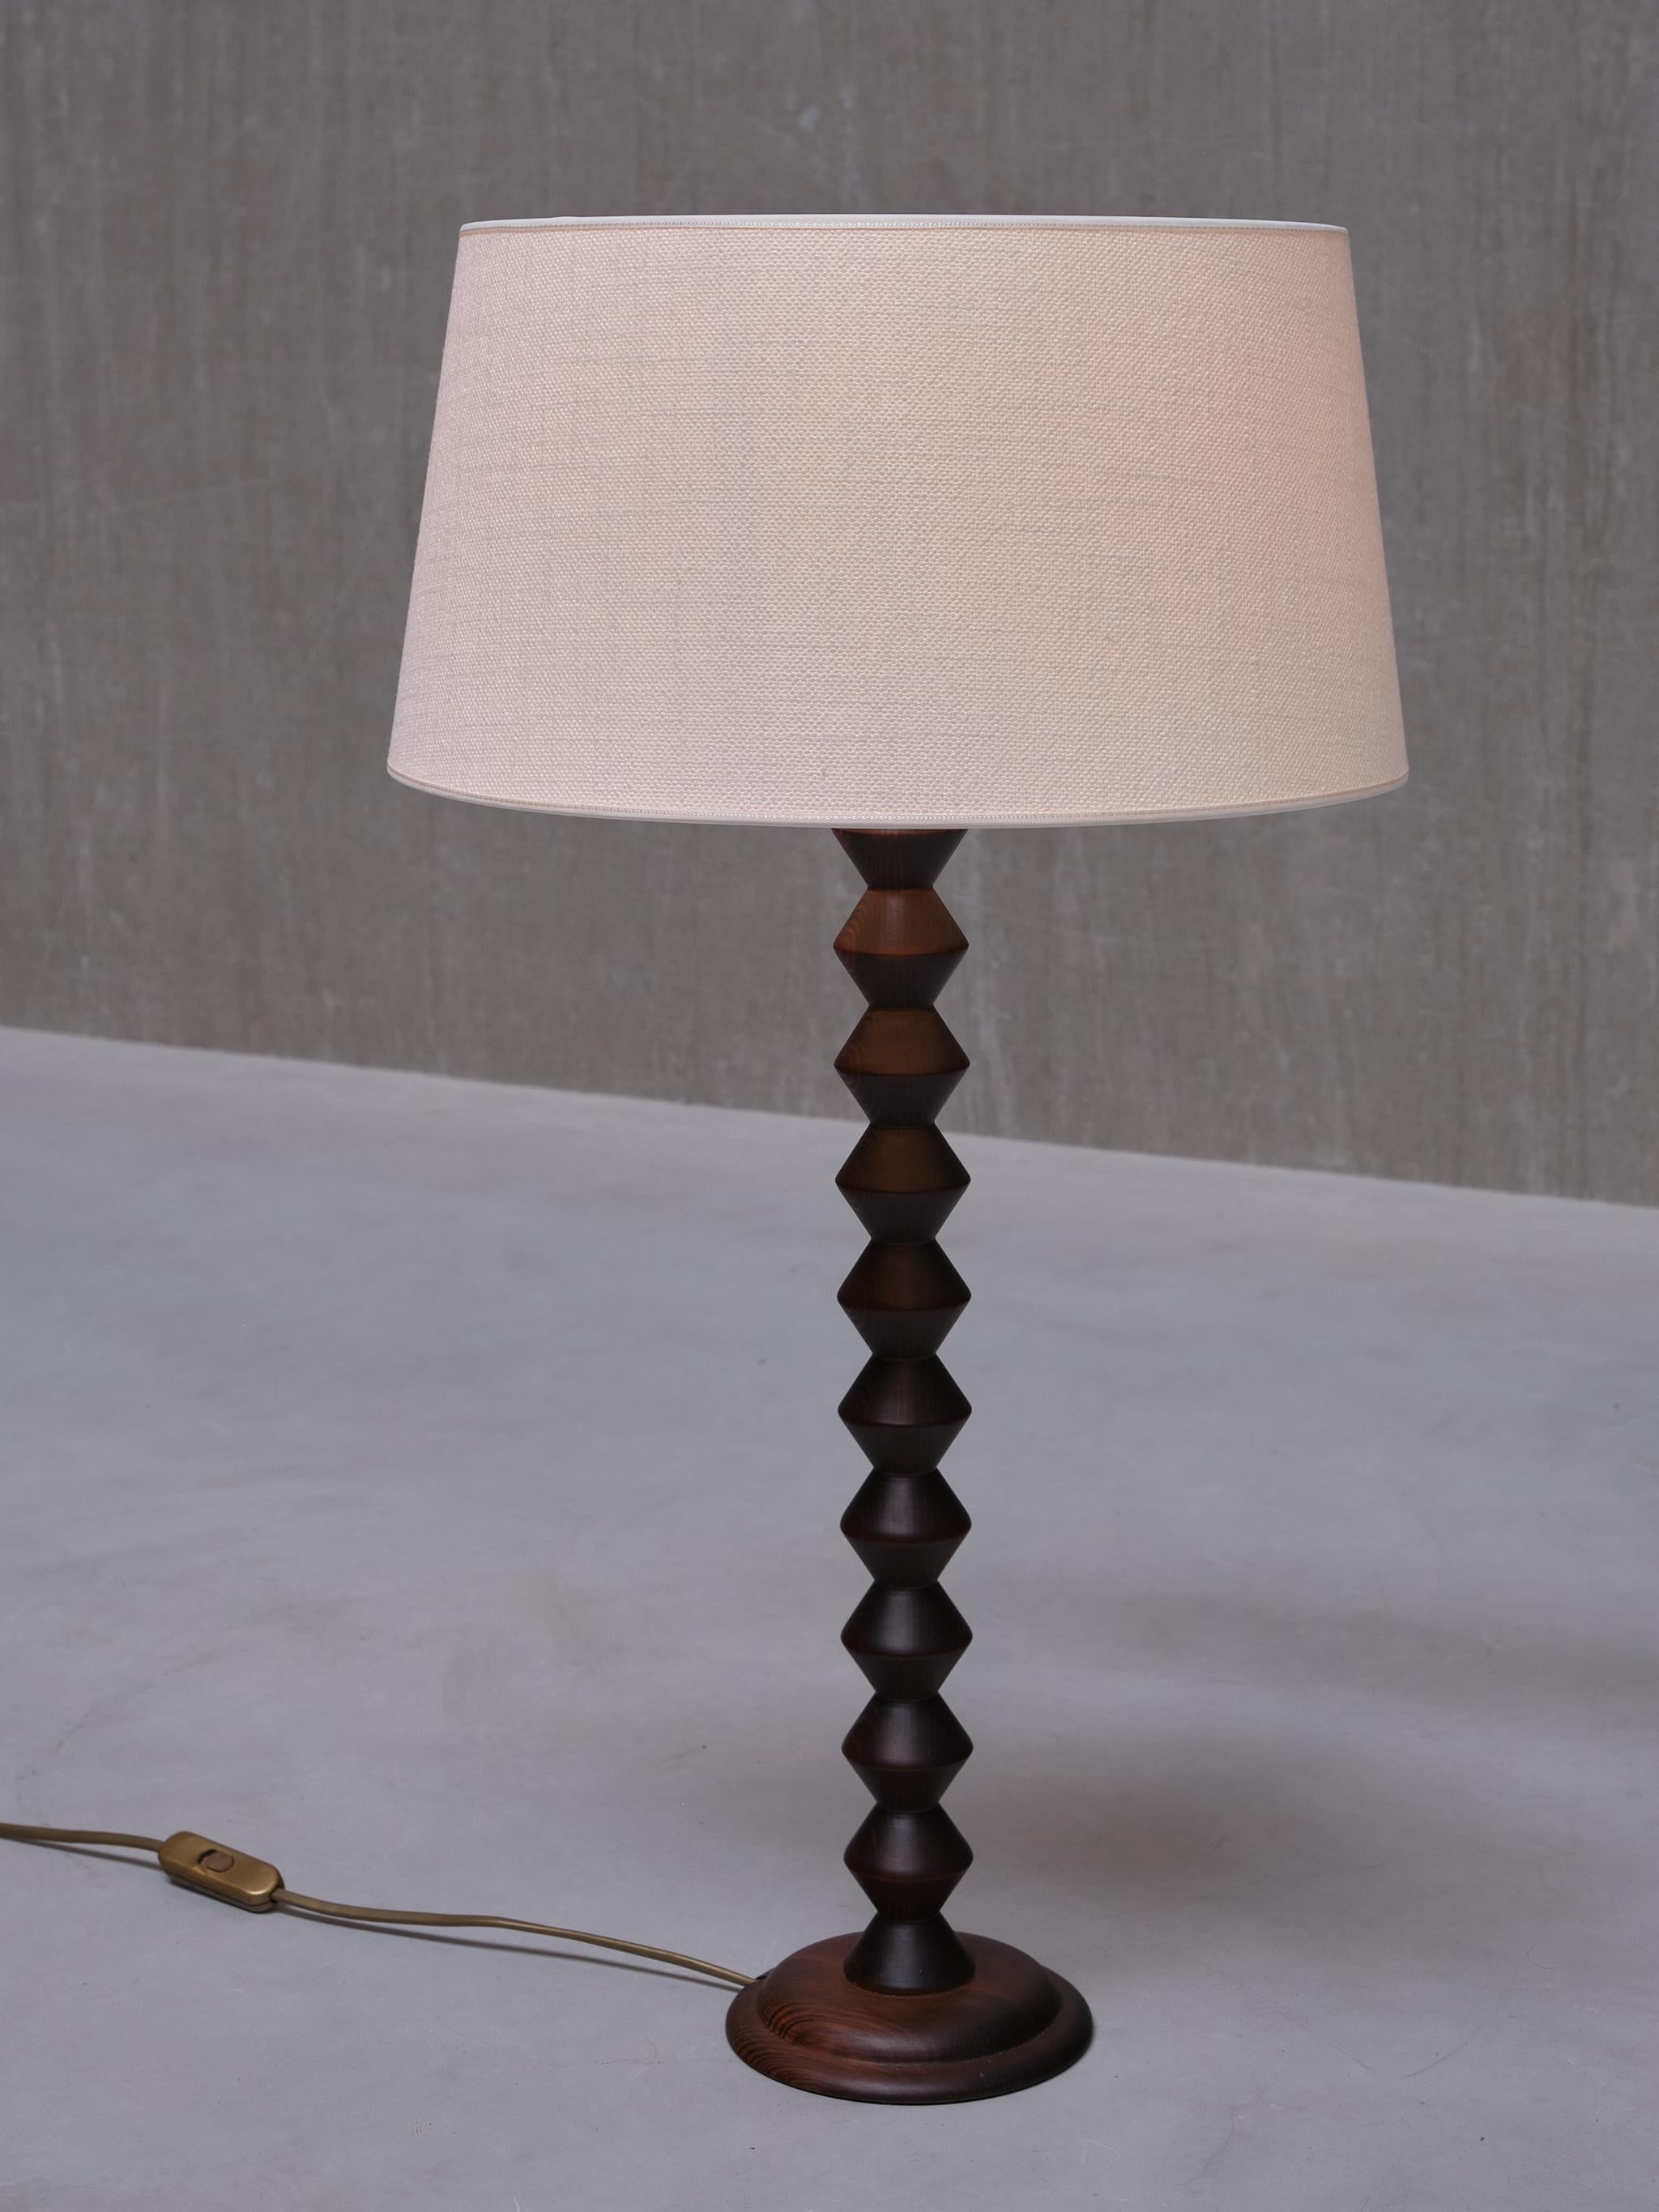 Fabric Charles Dudouyt Attributed Tall Table Lamp in Oak, France, 1950s For Sale